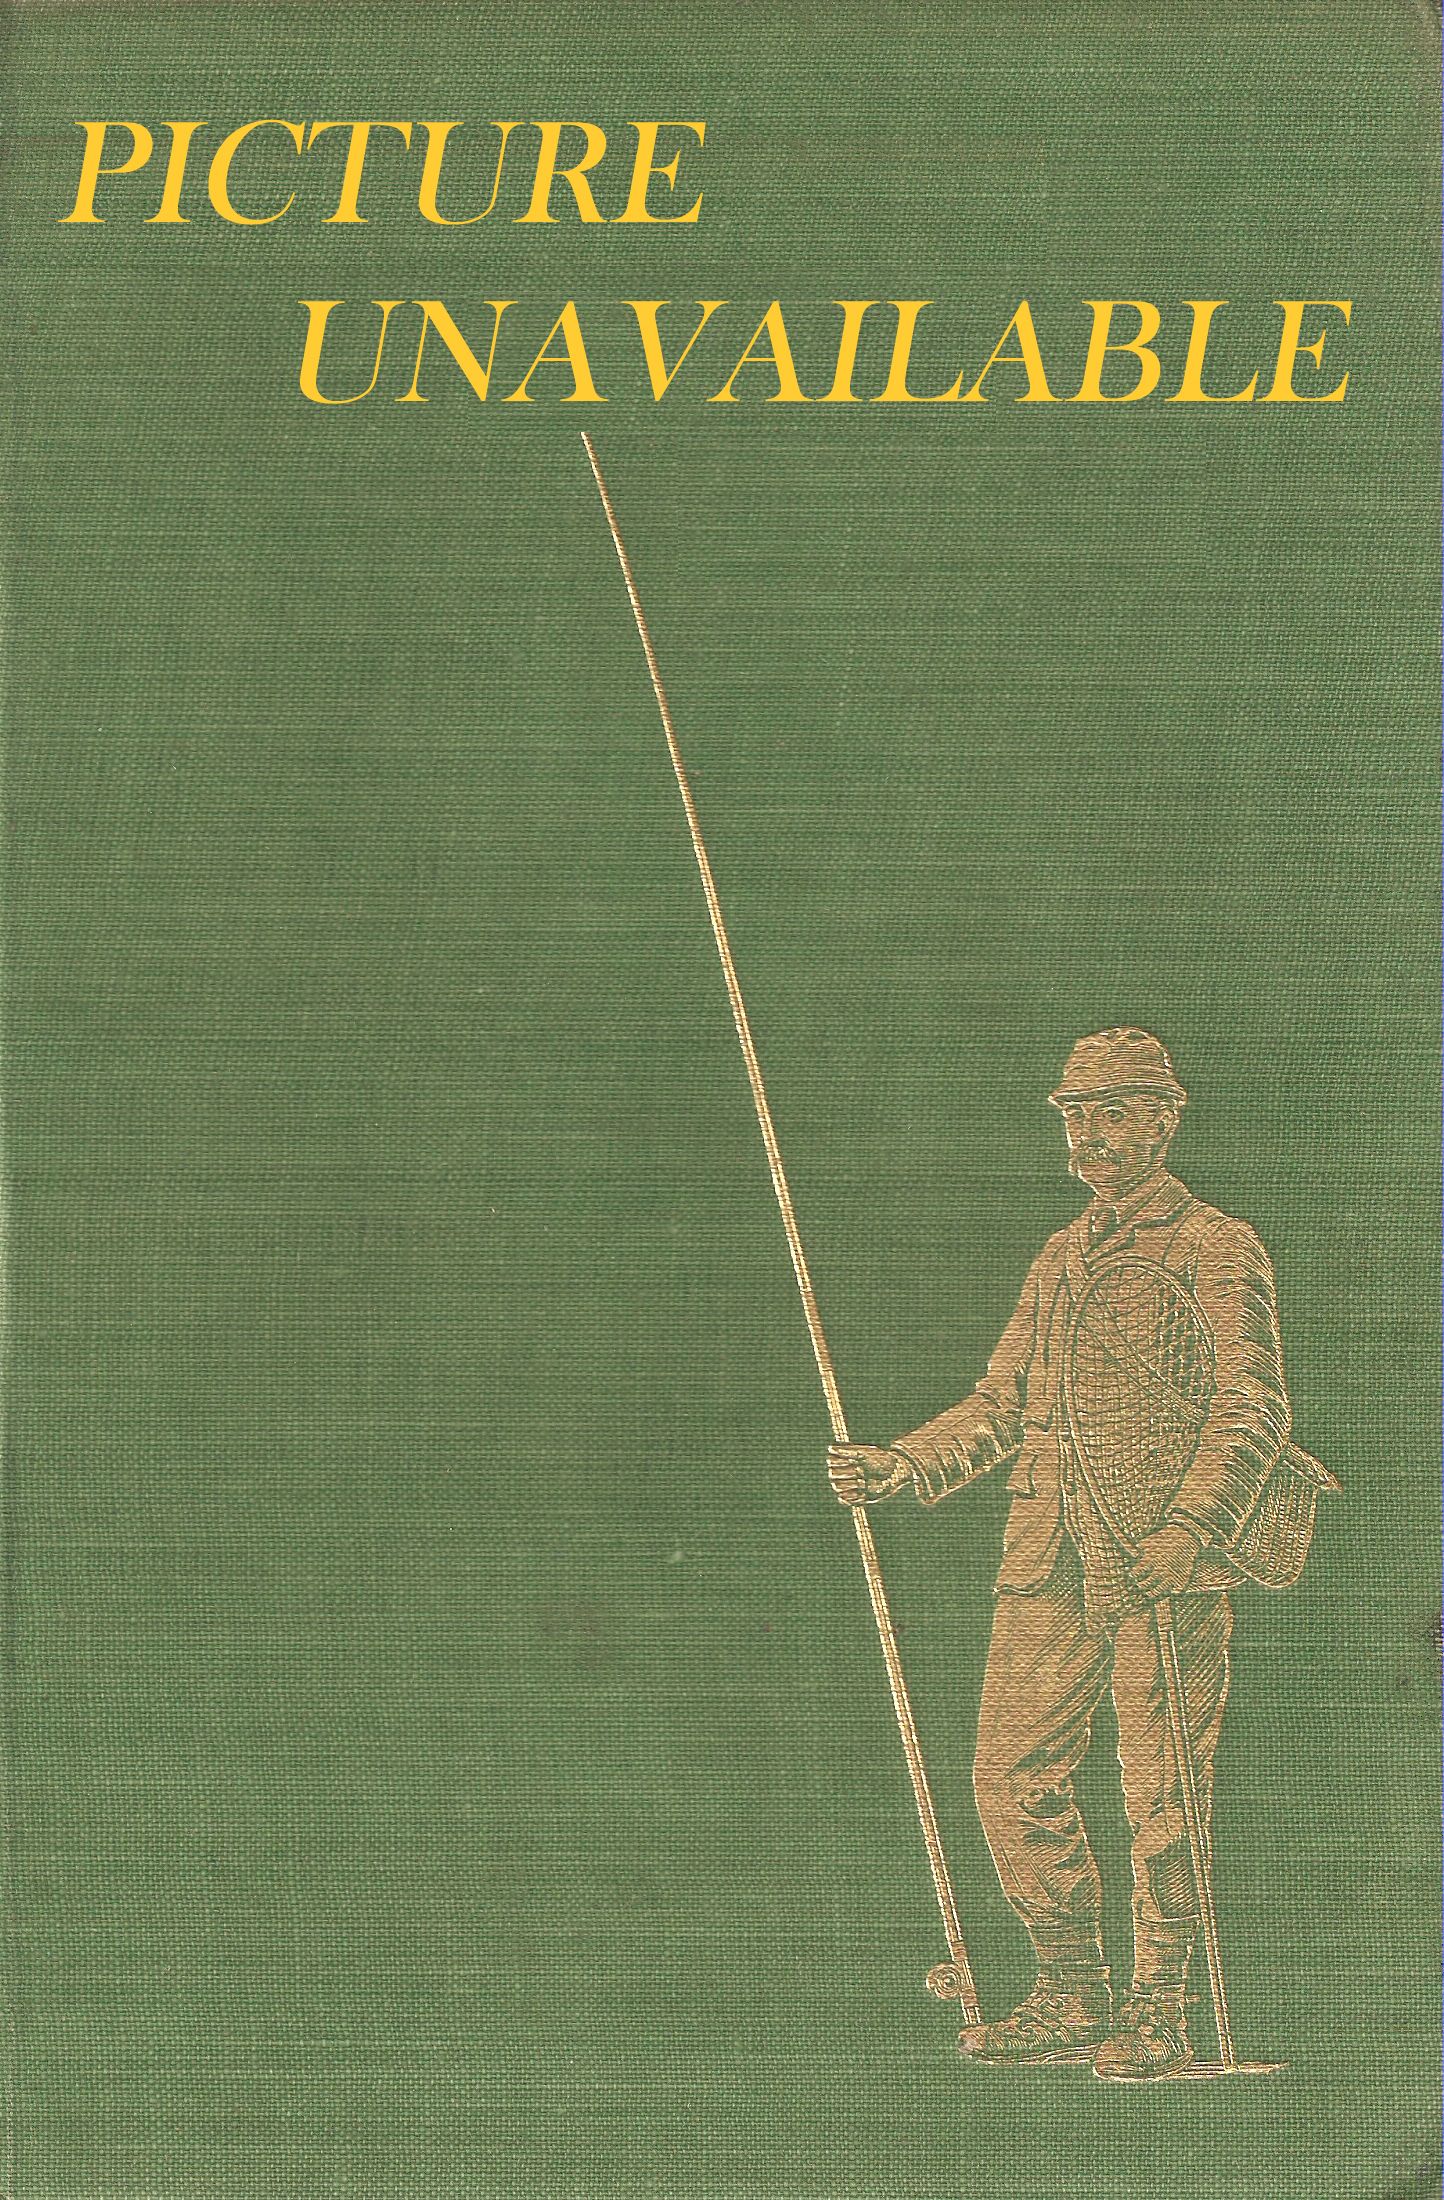 THE COMPLETE SCIENCE OF FLY FISHING AND SPINNING. By Fred. G. Shaw, F.G.S.